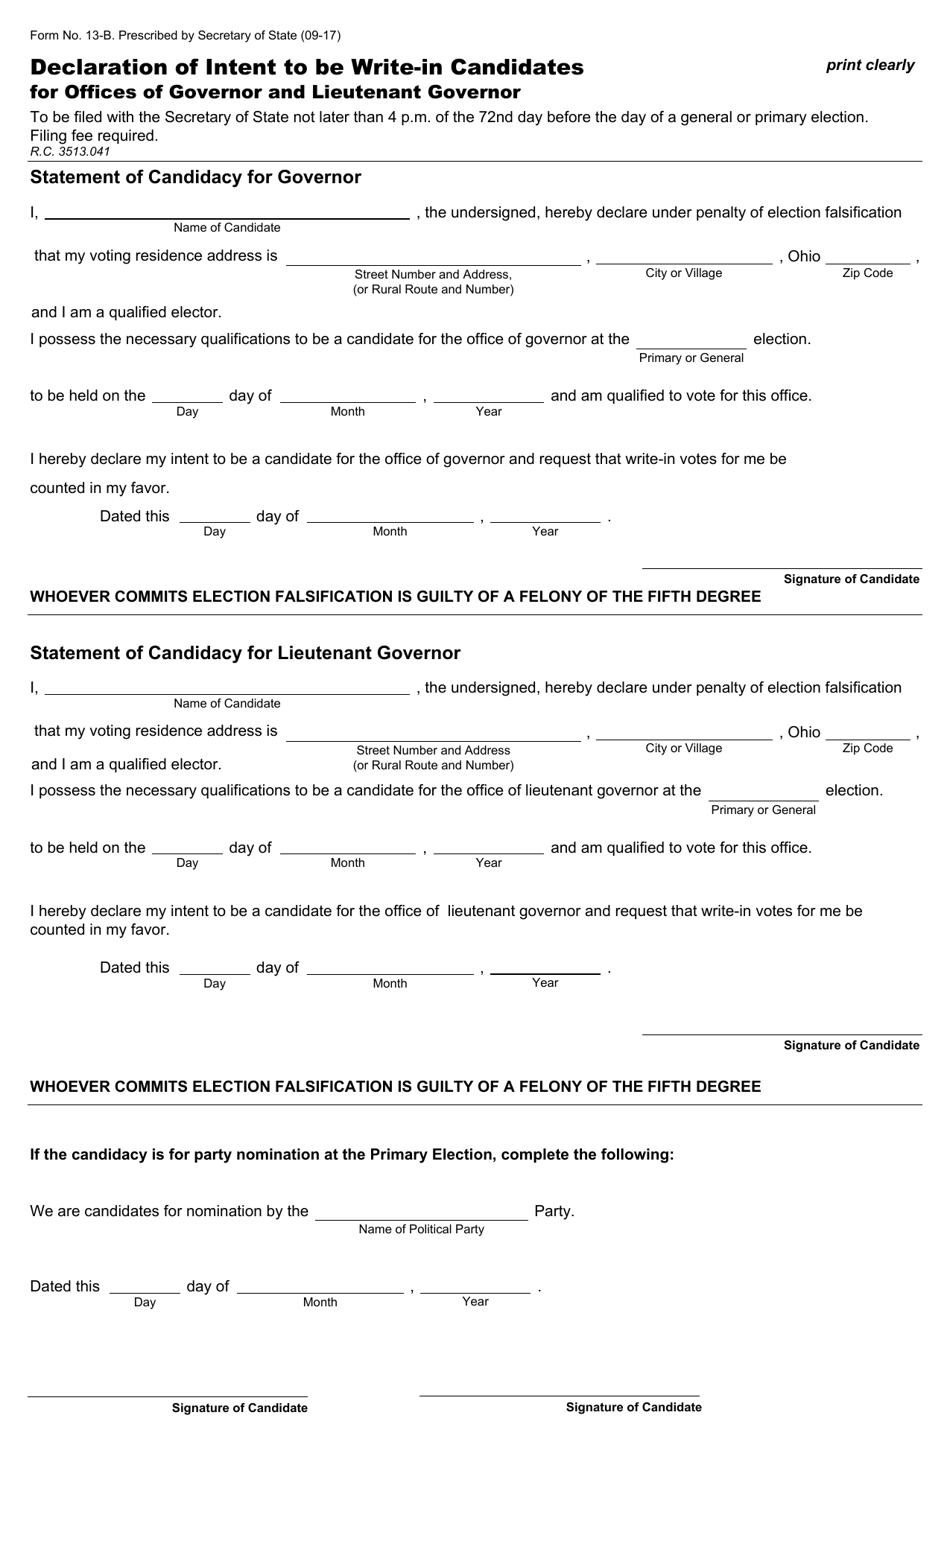 Form 13-B Declaration of Intent to Be Write-In Candidates for Offices of Governor and Lieutenant Governor - Ohio, Page 1